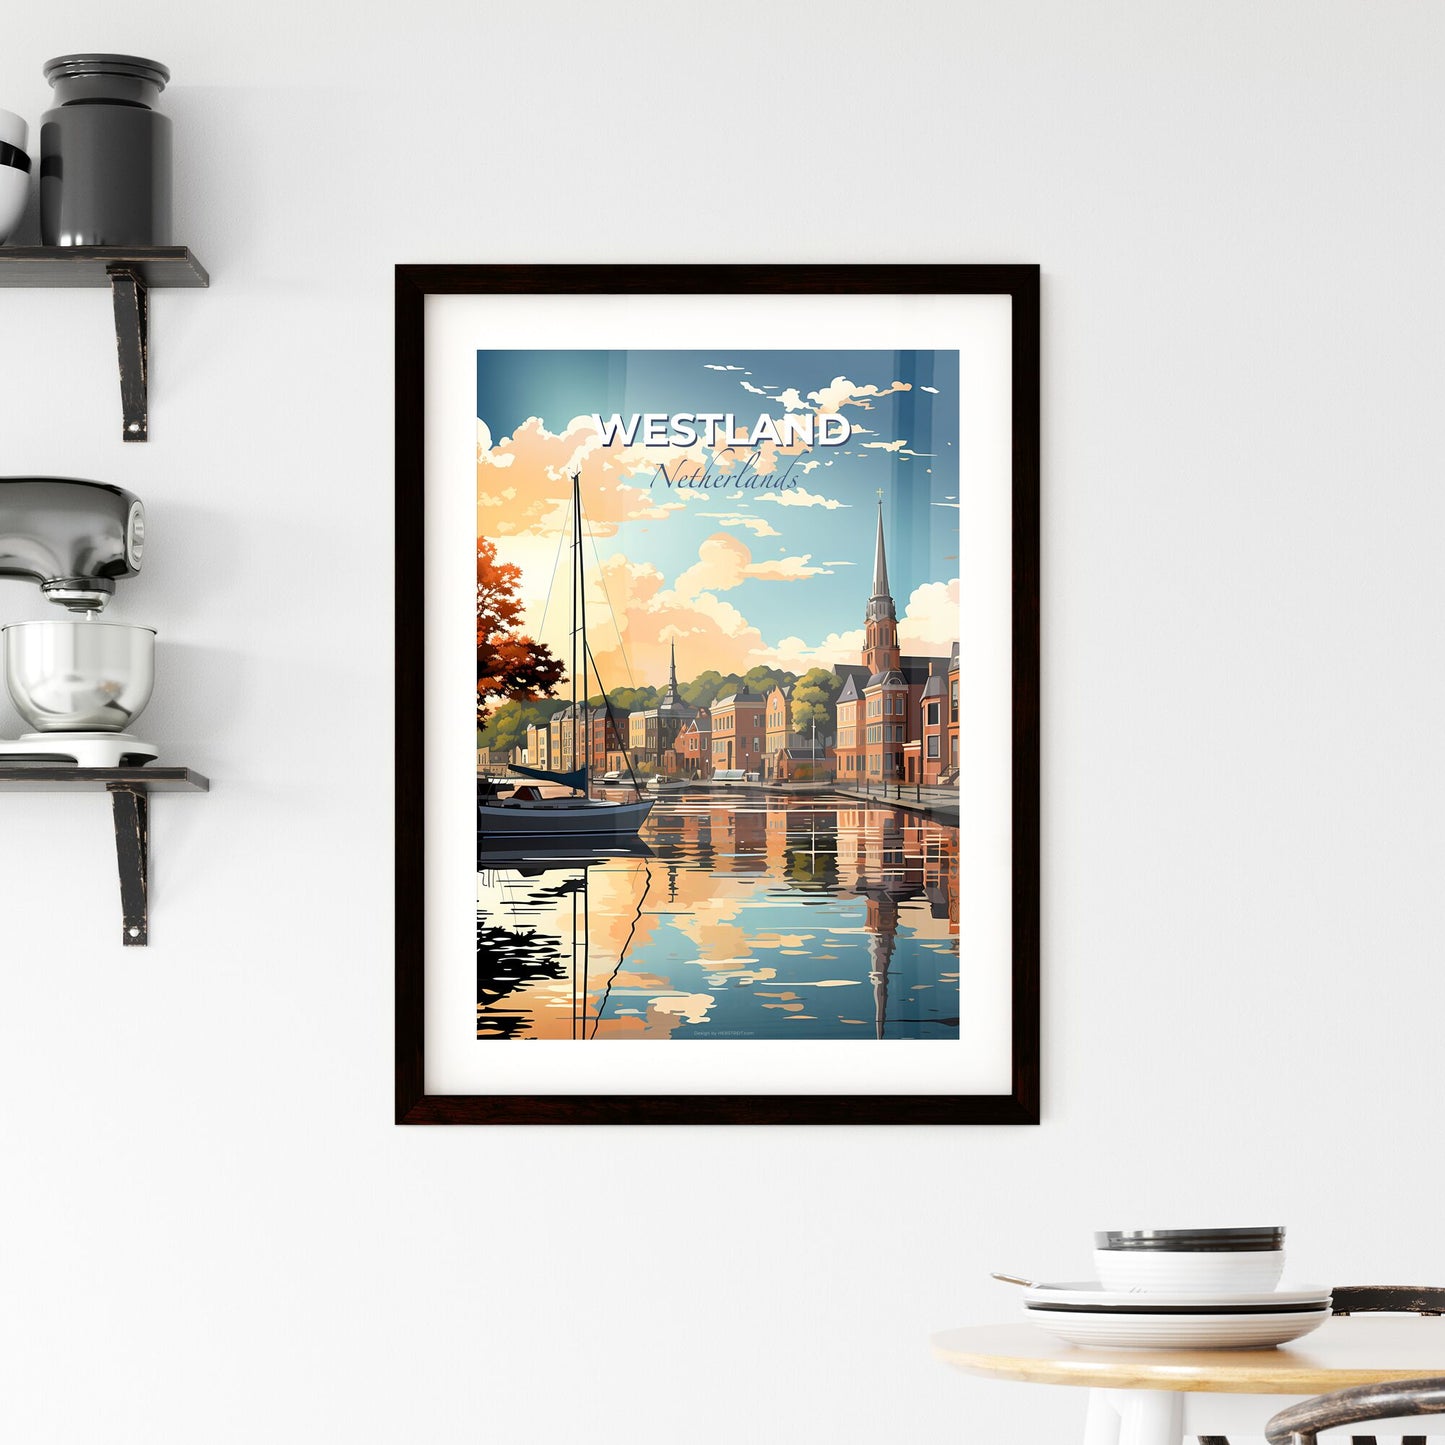 Westland, Netherlands, A Poster of a water body of water with a boat in it Default Title